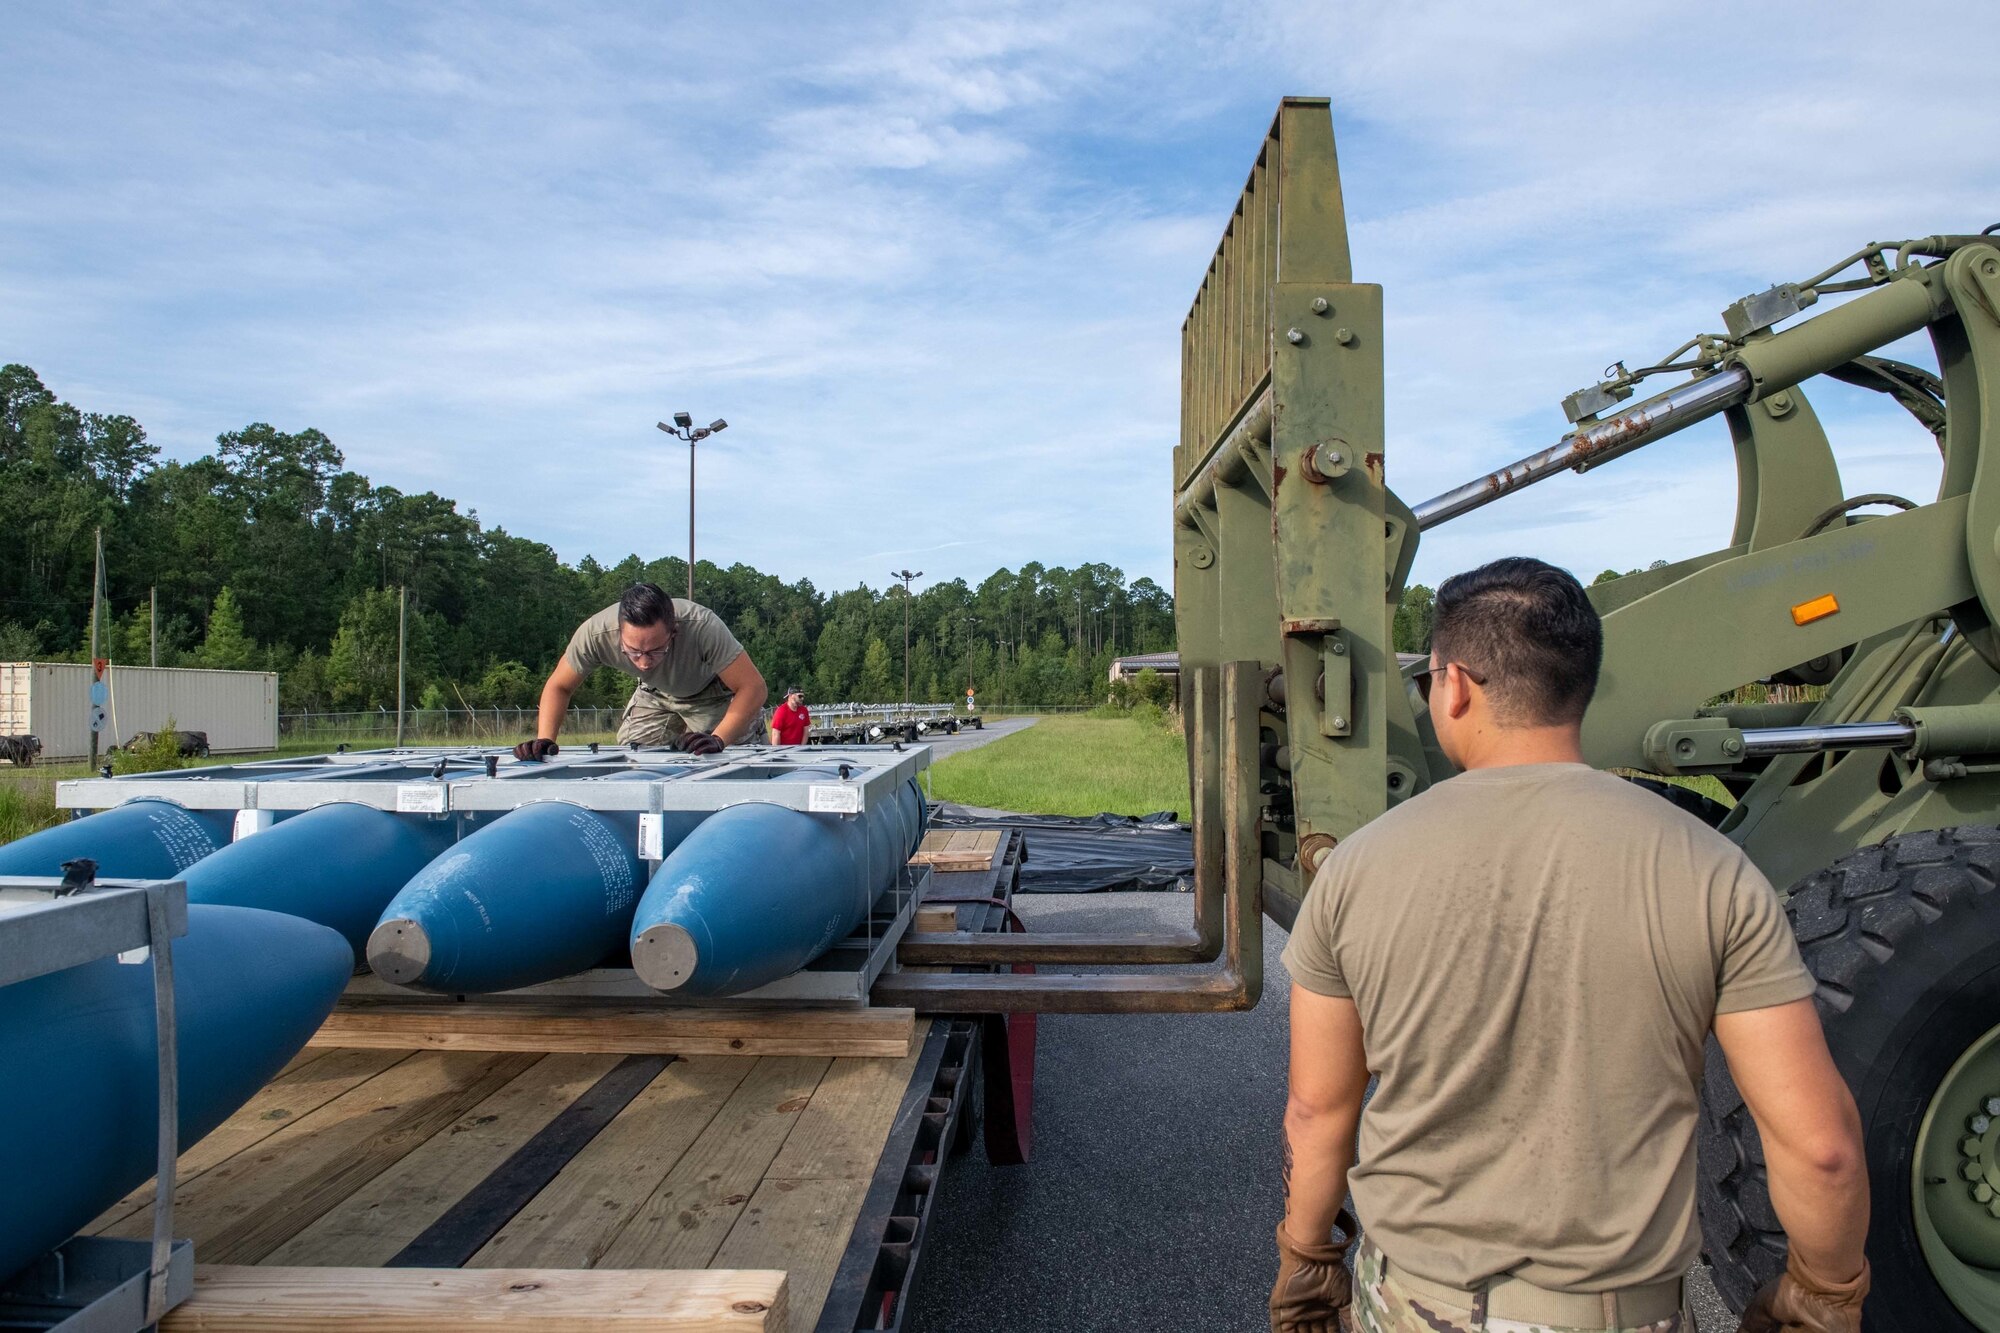 U.S. Air Force Staff Sgt. Huy Dinh, 125th Munitions Flight line delivery production supervisor, unloads training munitions that arrived at the 125th Fighter Wing, Florida Air National Guard, on Aug. 24, 2022. The inert general purpose bombs, called the MK-84s, are the first air-to-ground training assets to arrive for the new F-35 Lightning II mission. (U.S. Air National Guard photo by Tech Sgt. Chelsea Smith)